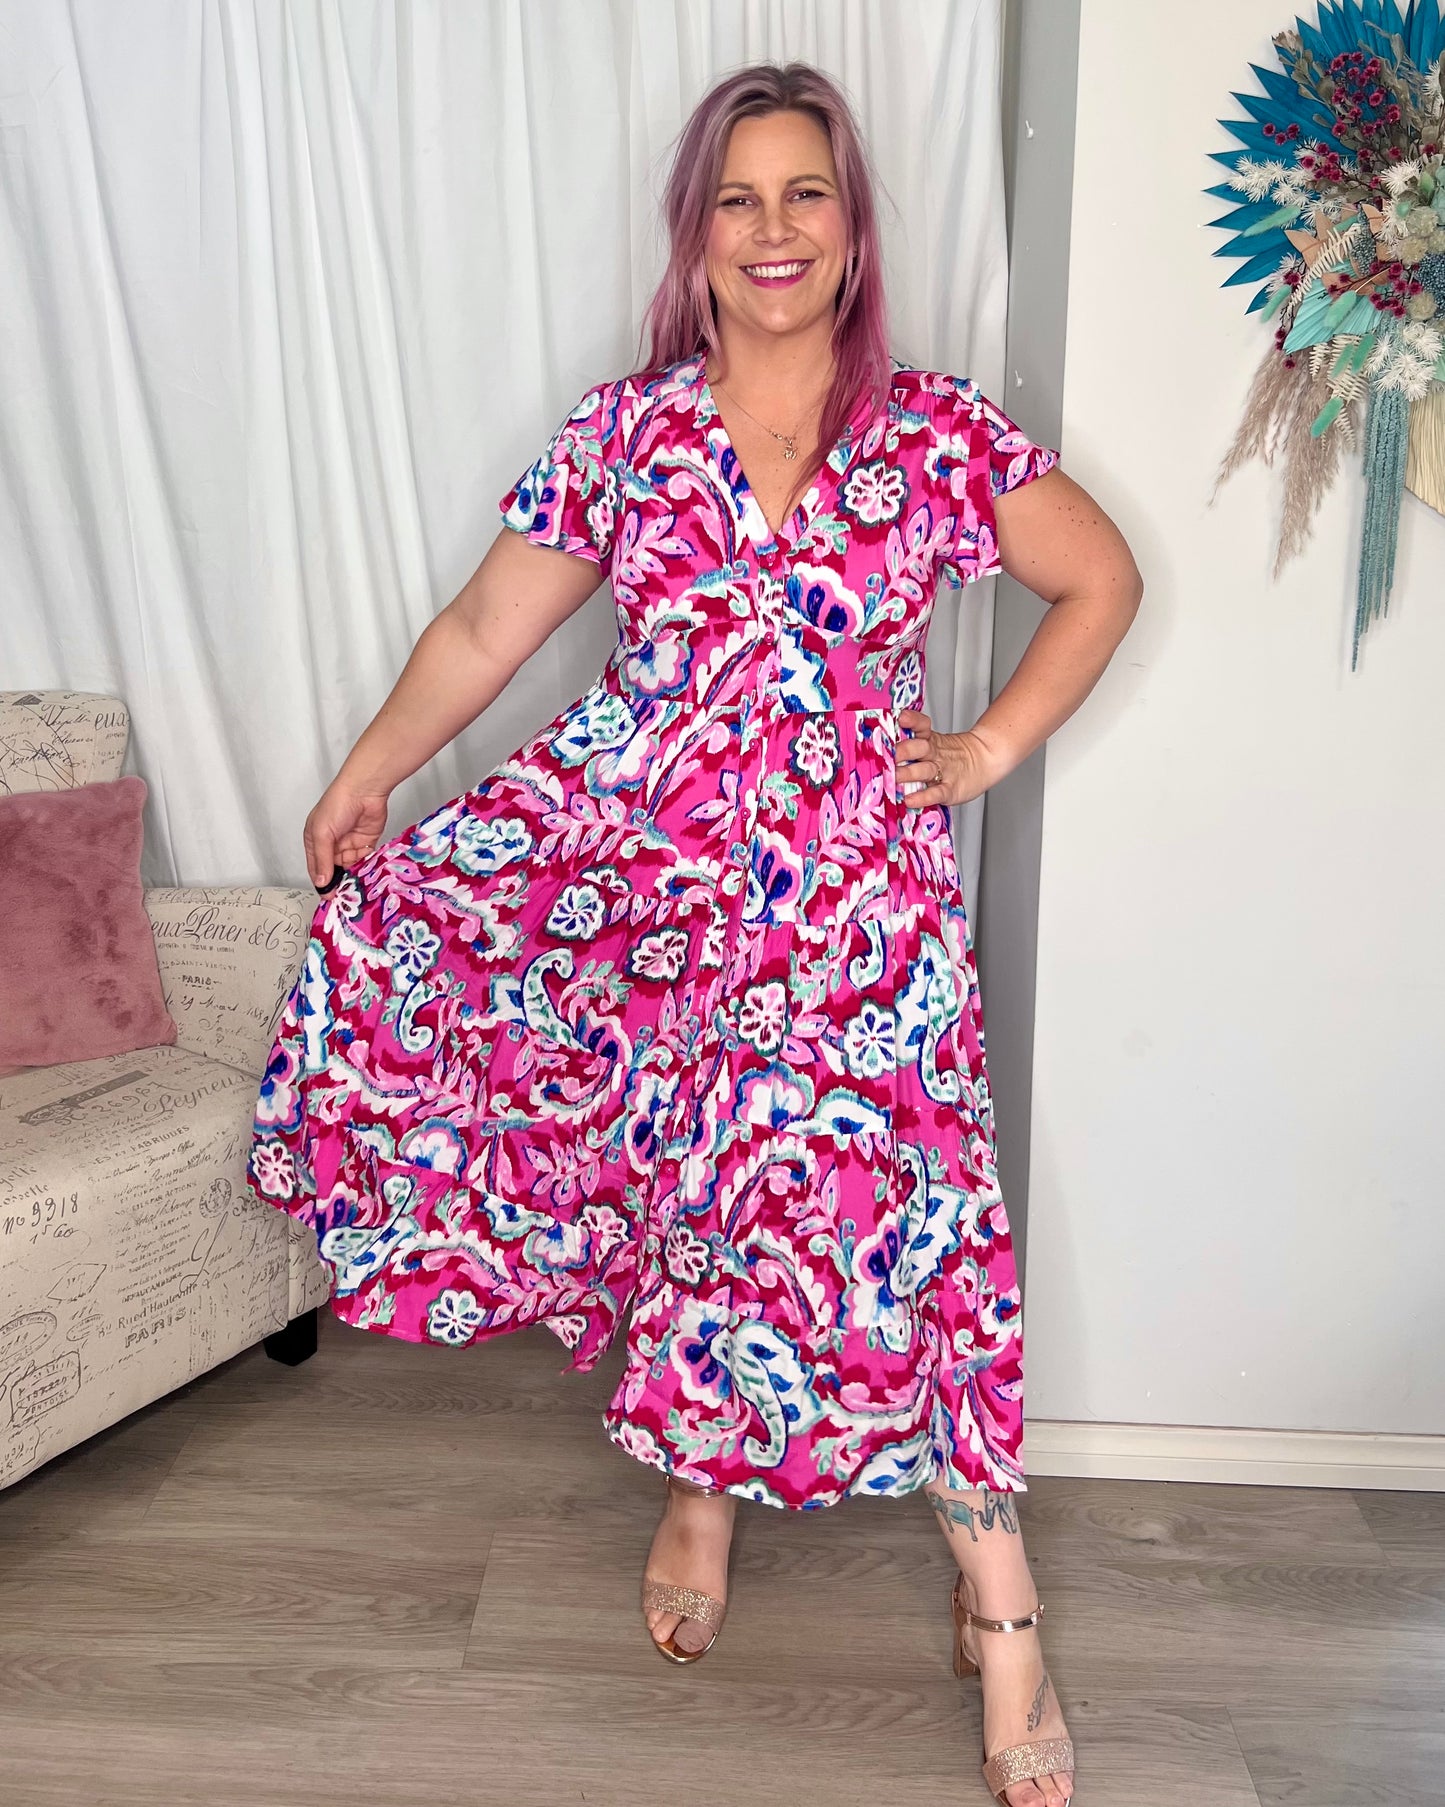 Stella Midi Dress: The Stella Dress features a vibrant pink print in pink and blue, with flutter sleeves and a shirred waist band creating a stunning silhouette
Features:

V-neckline t - Ciao Bella Dresses 